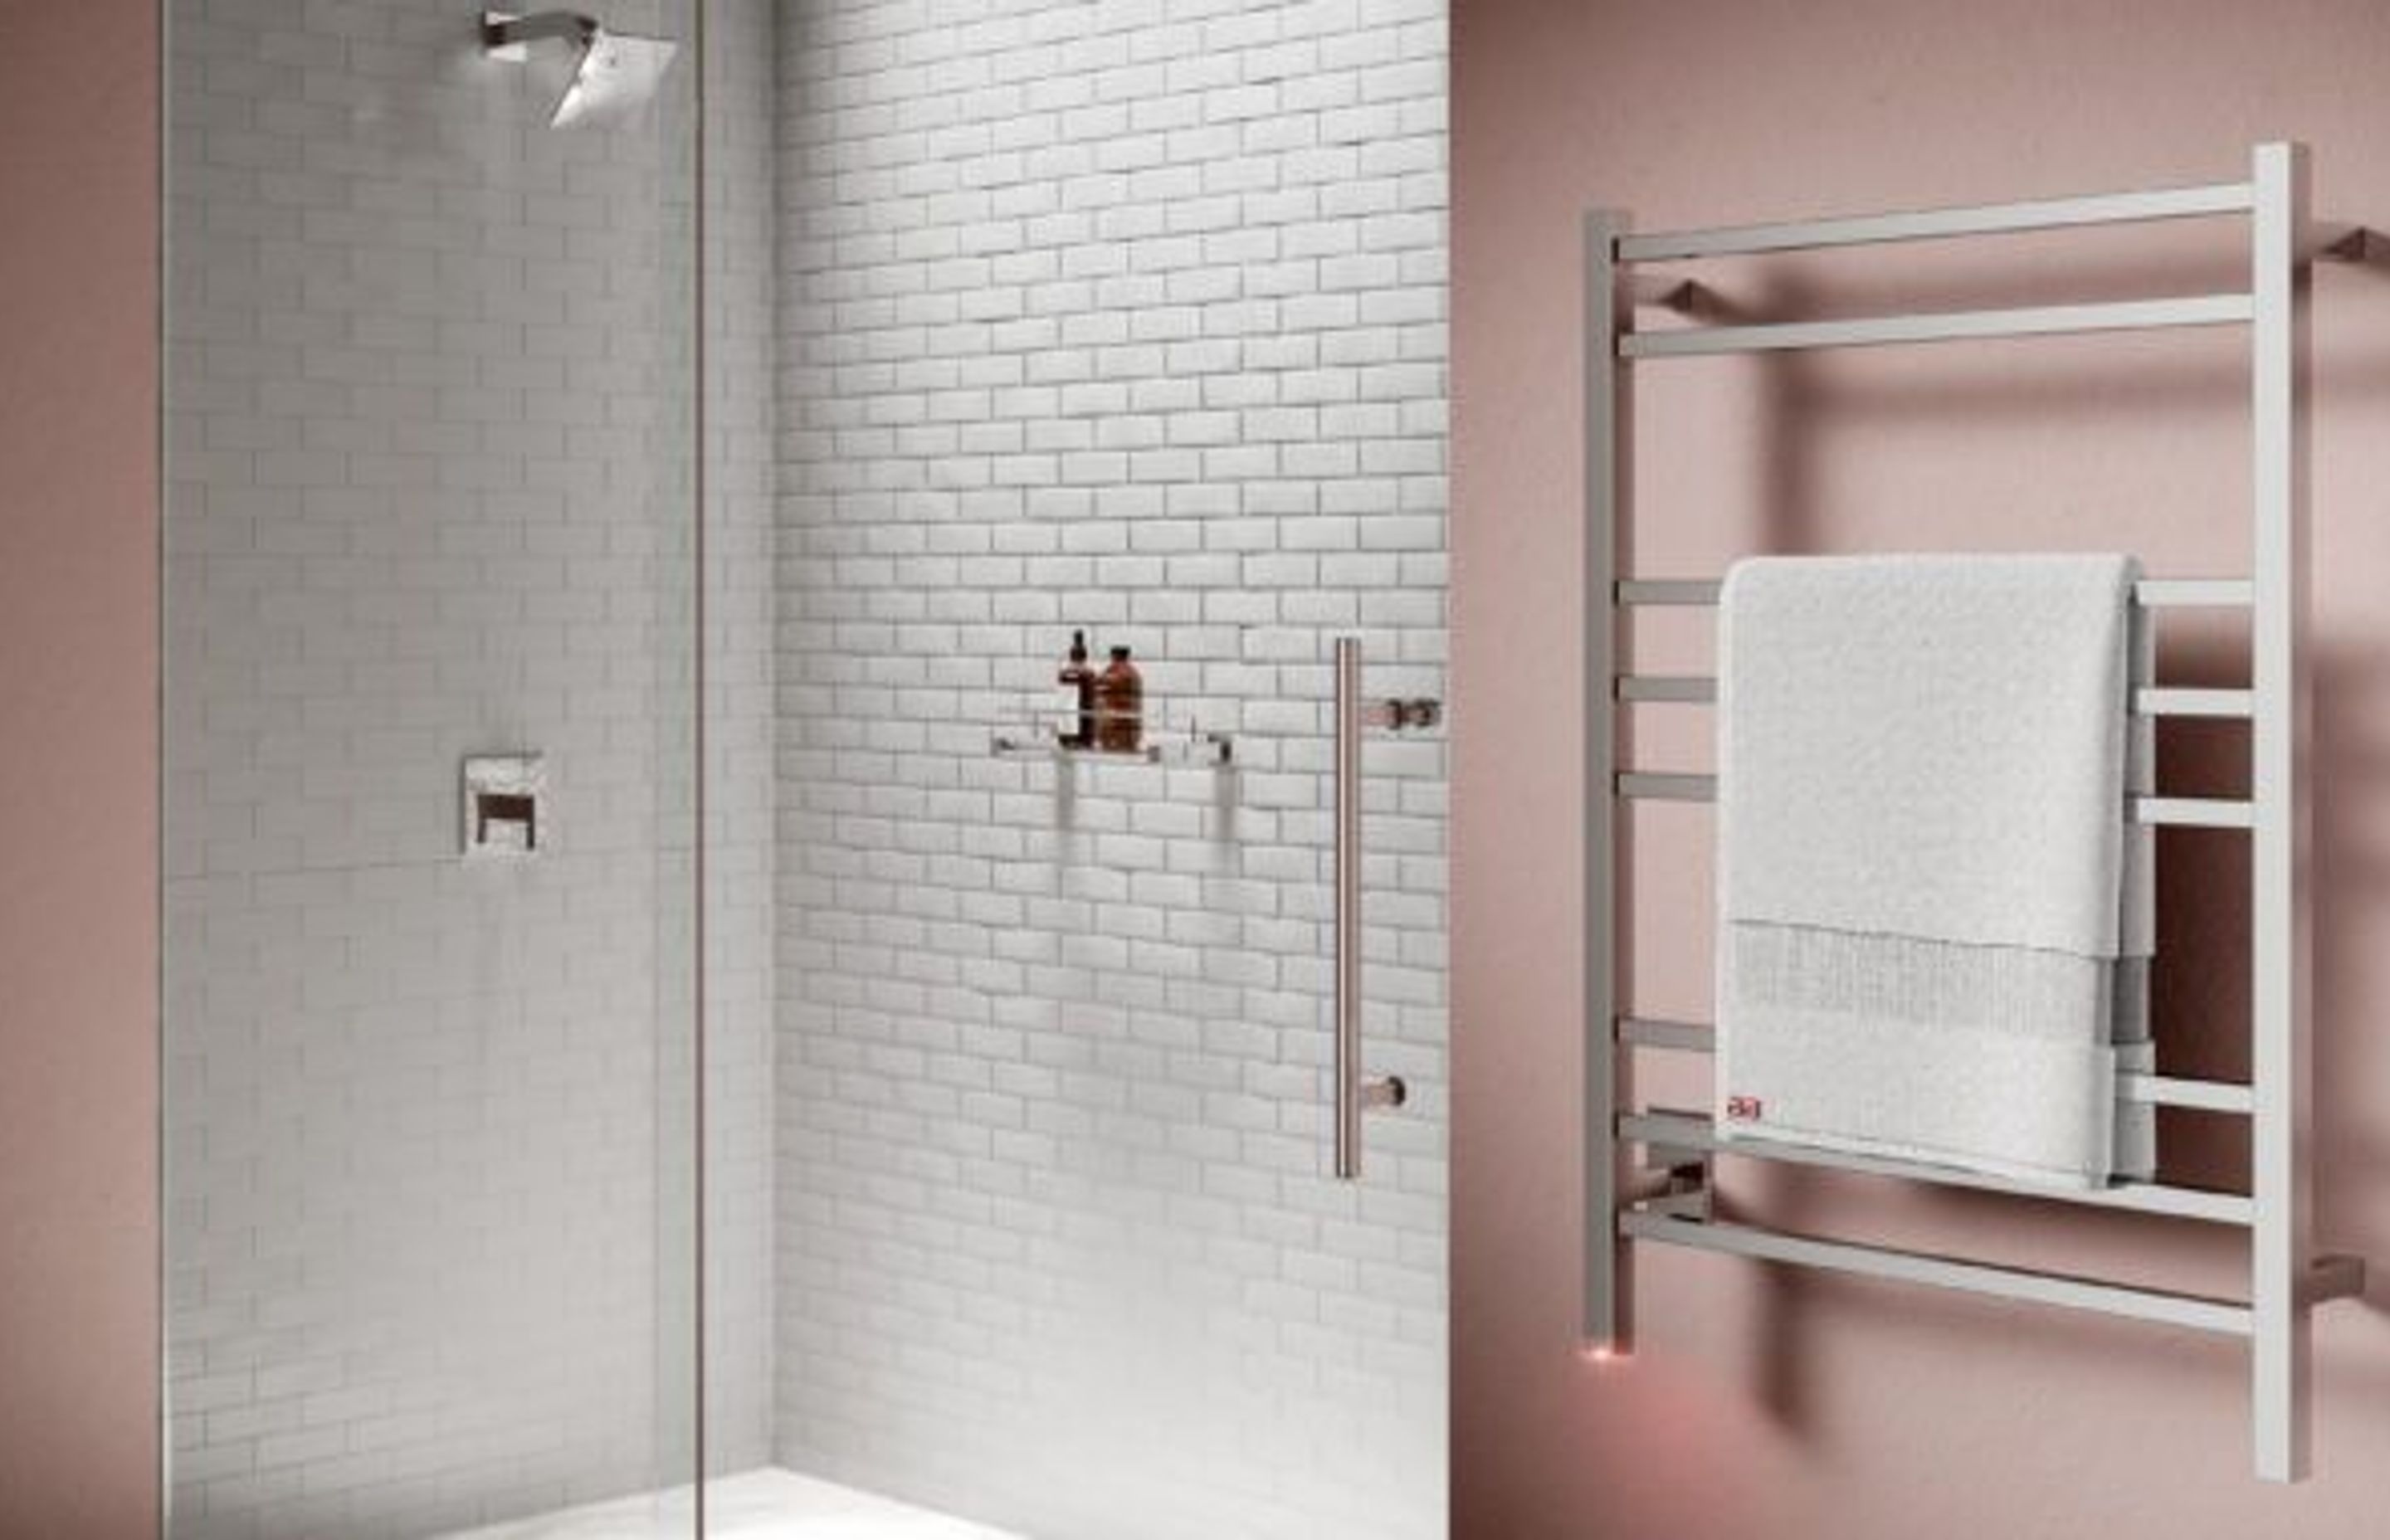 CUBIC 8 Bar 650mm heated towel rail with PTSelect Switch (US model shown here - square cover plate)